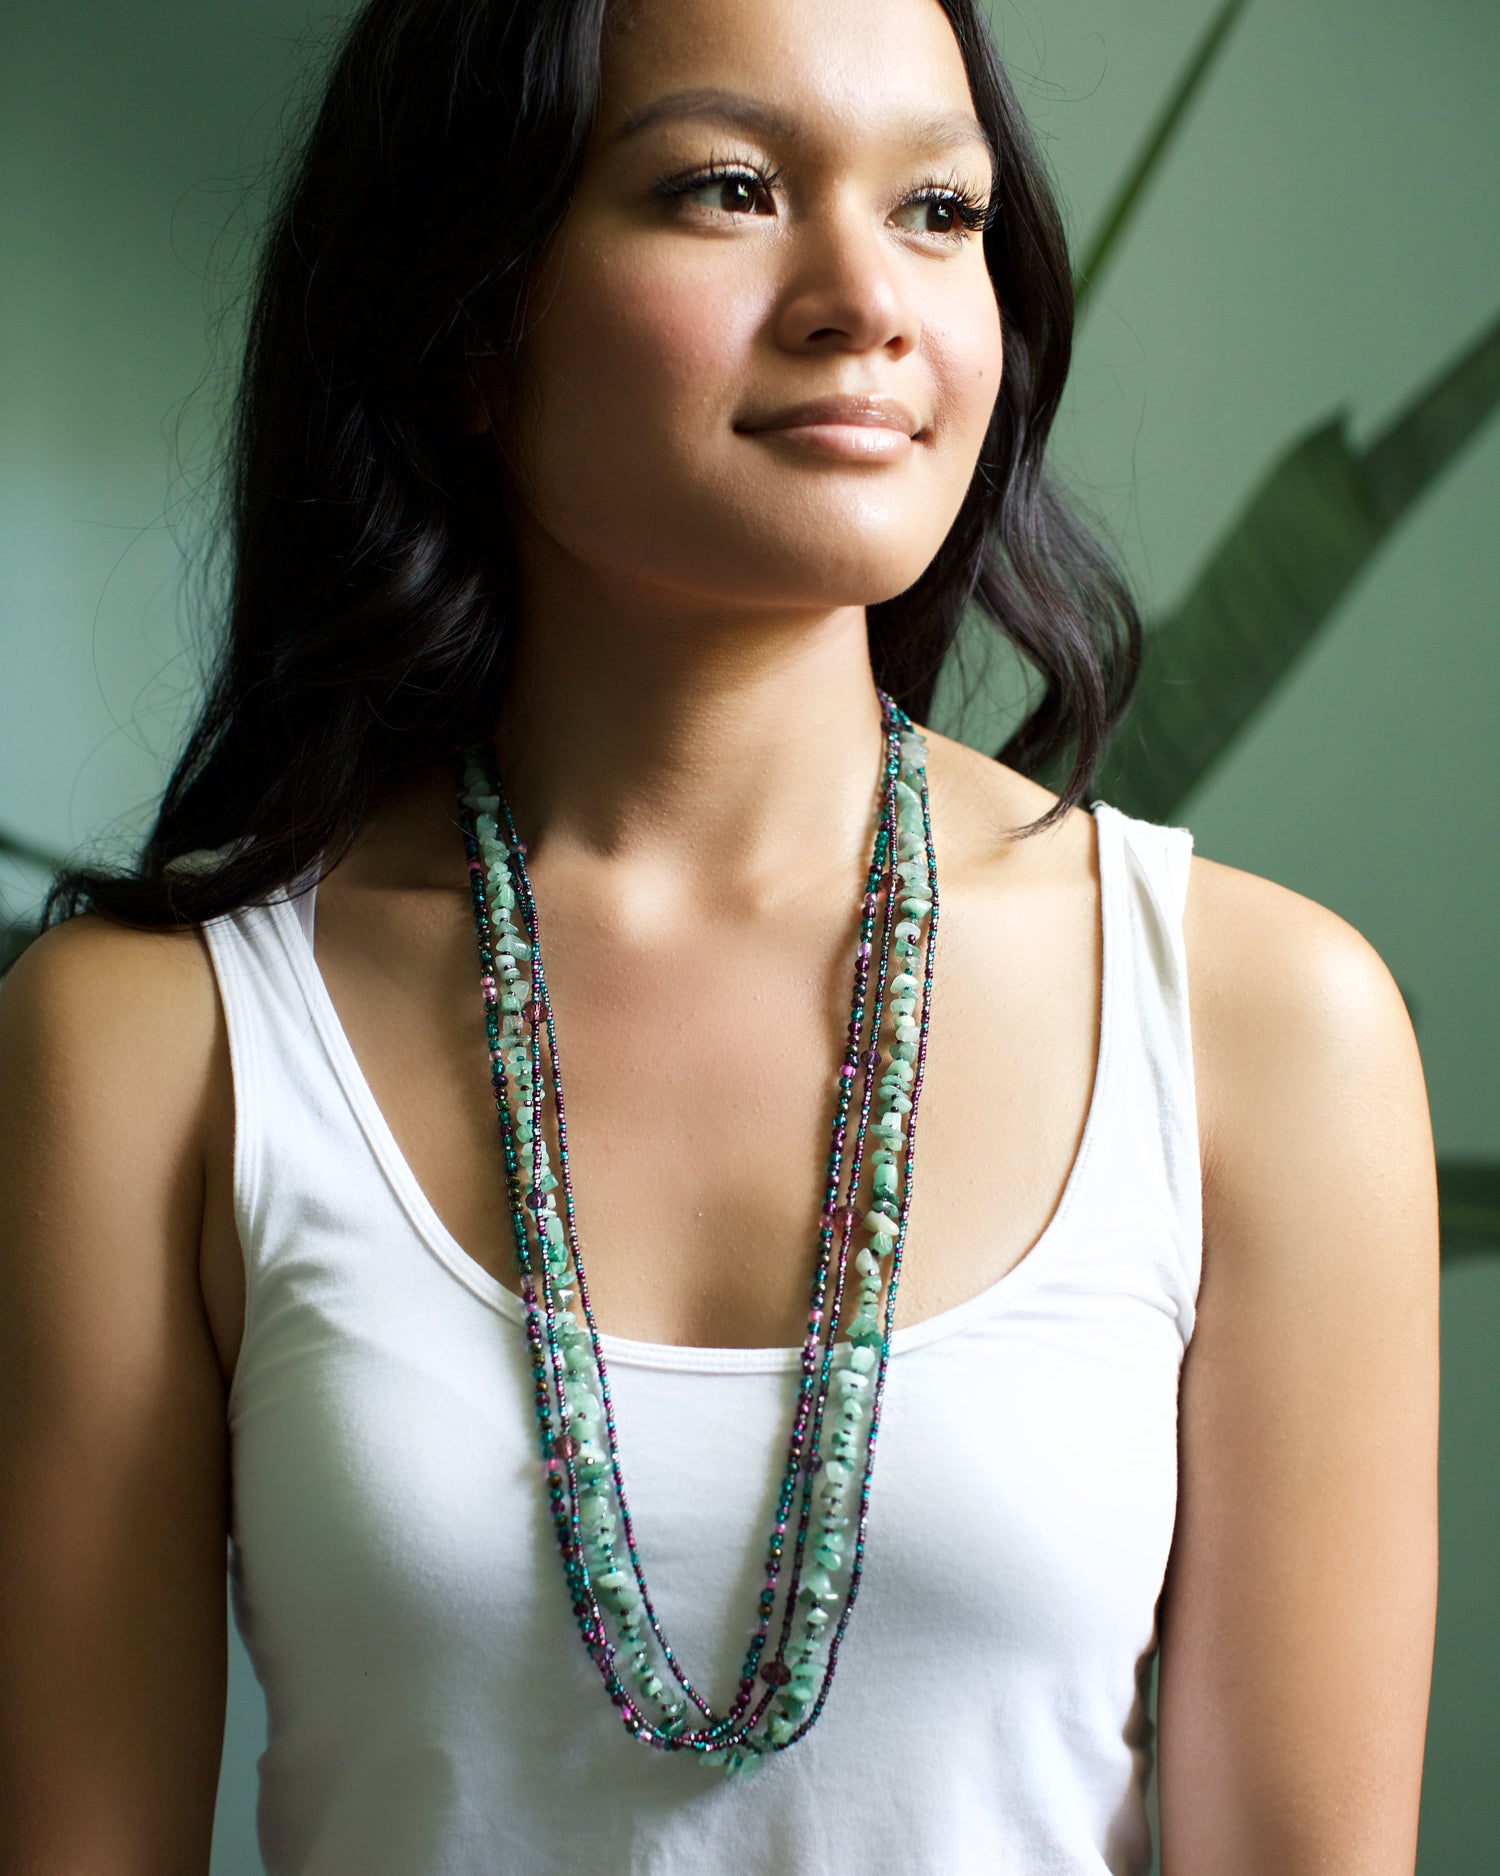 Lucia's World Emporium Fair Trade Handmade Long Rock Candy Necklace from Guatemala in Teal